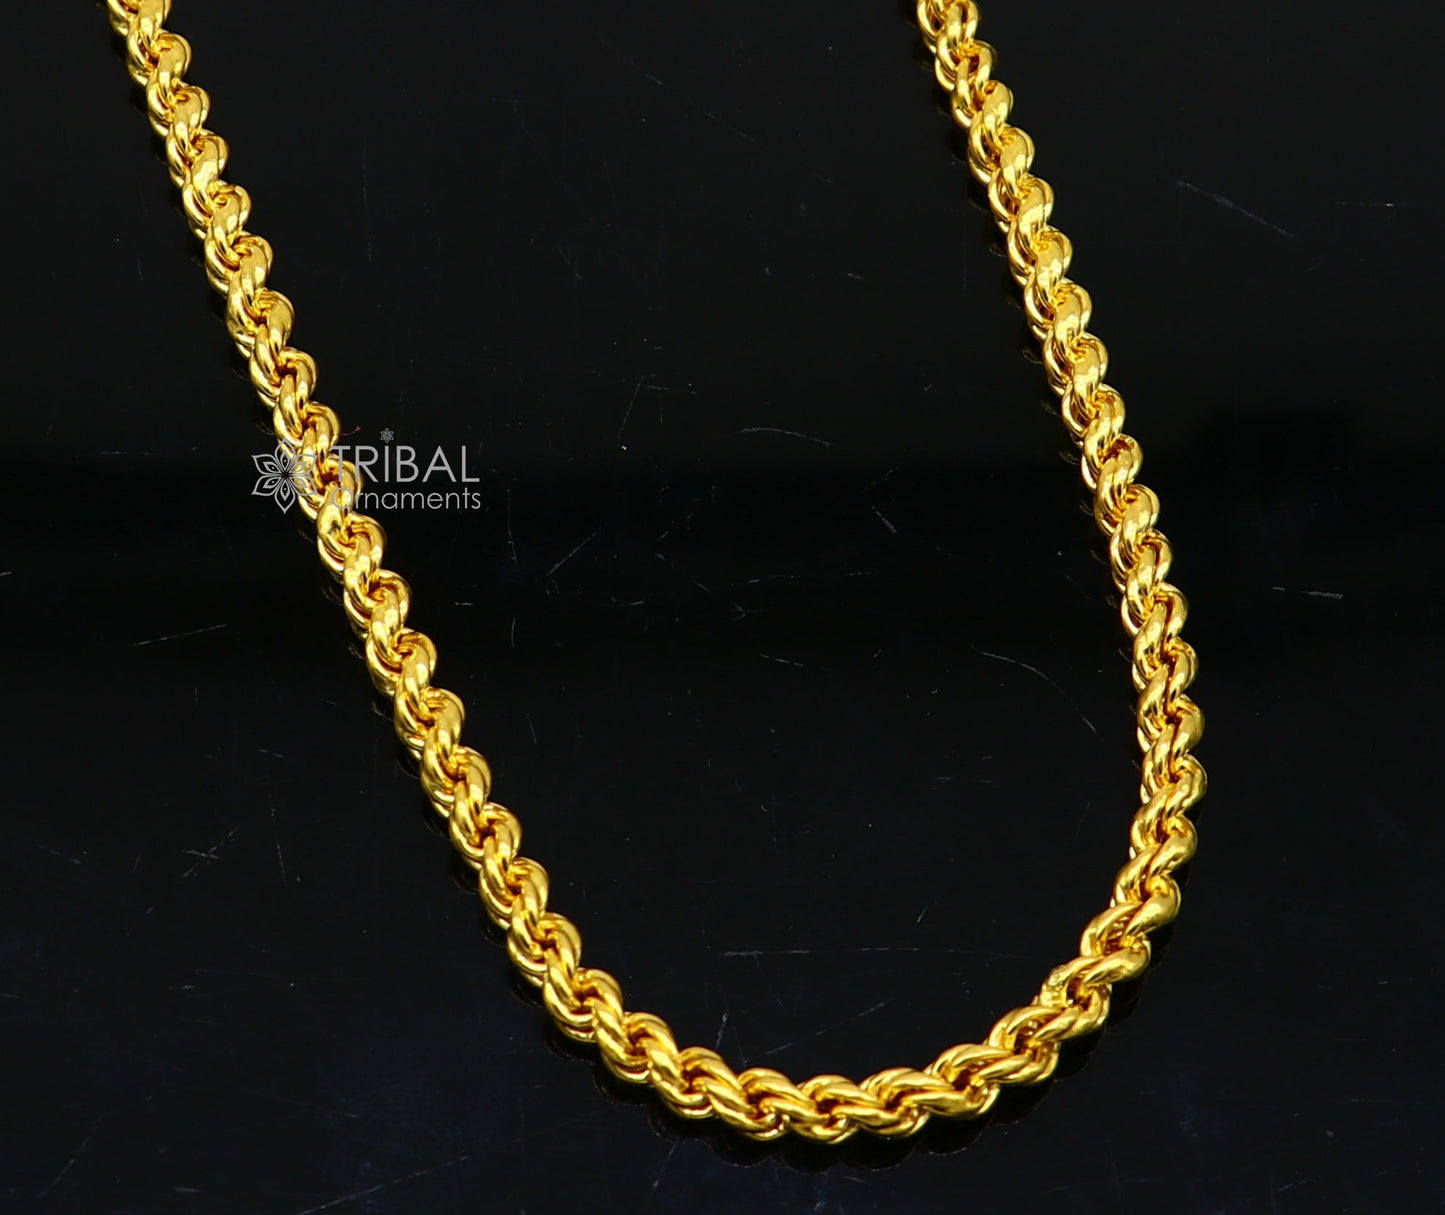 4mm 22k yellow gold handmade fabulous Rope chain necklace excellent gold unisex chain certified best gifting jewelry gch587 - TRIBAL ORNAMENTS